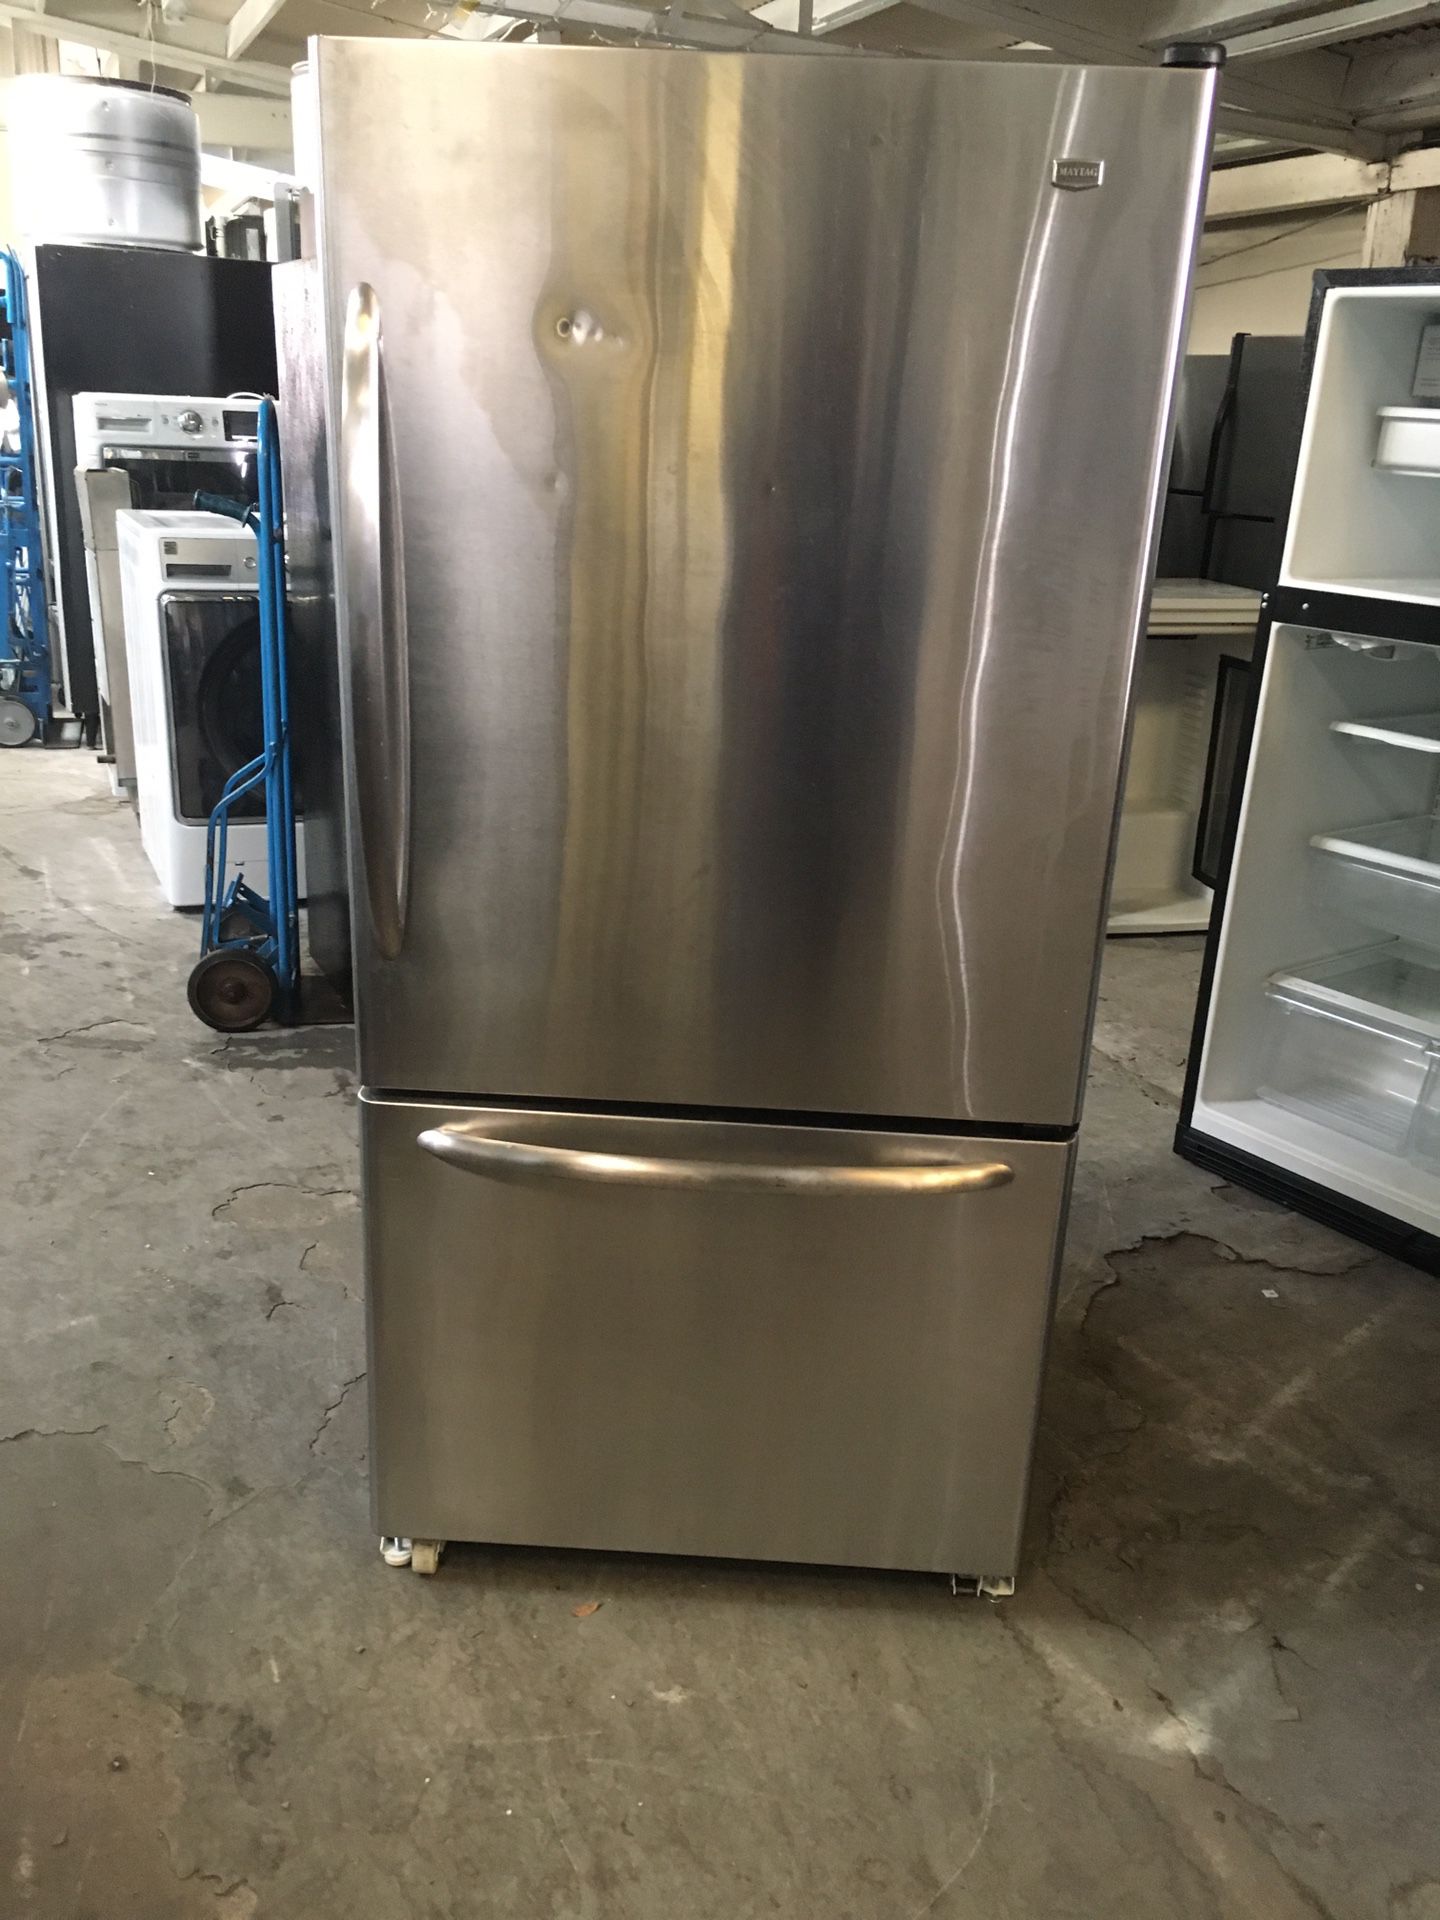 Refrigerator brand Maytag everything is good working condition 90 days warranty delivery and installation